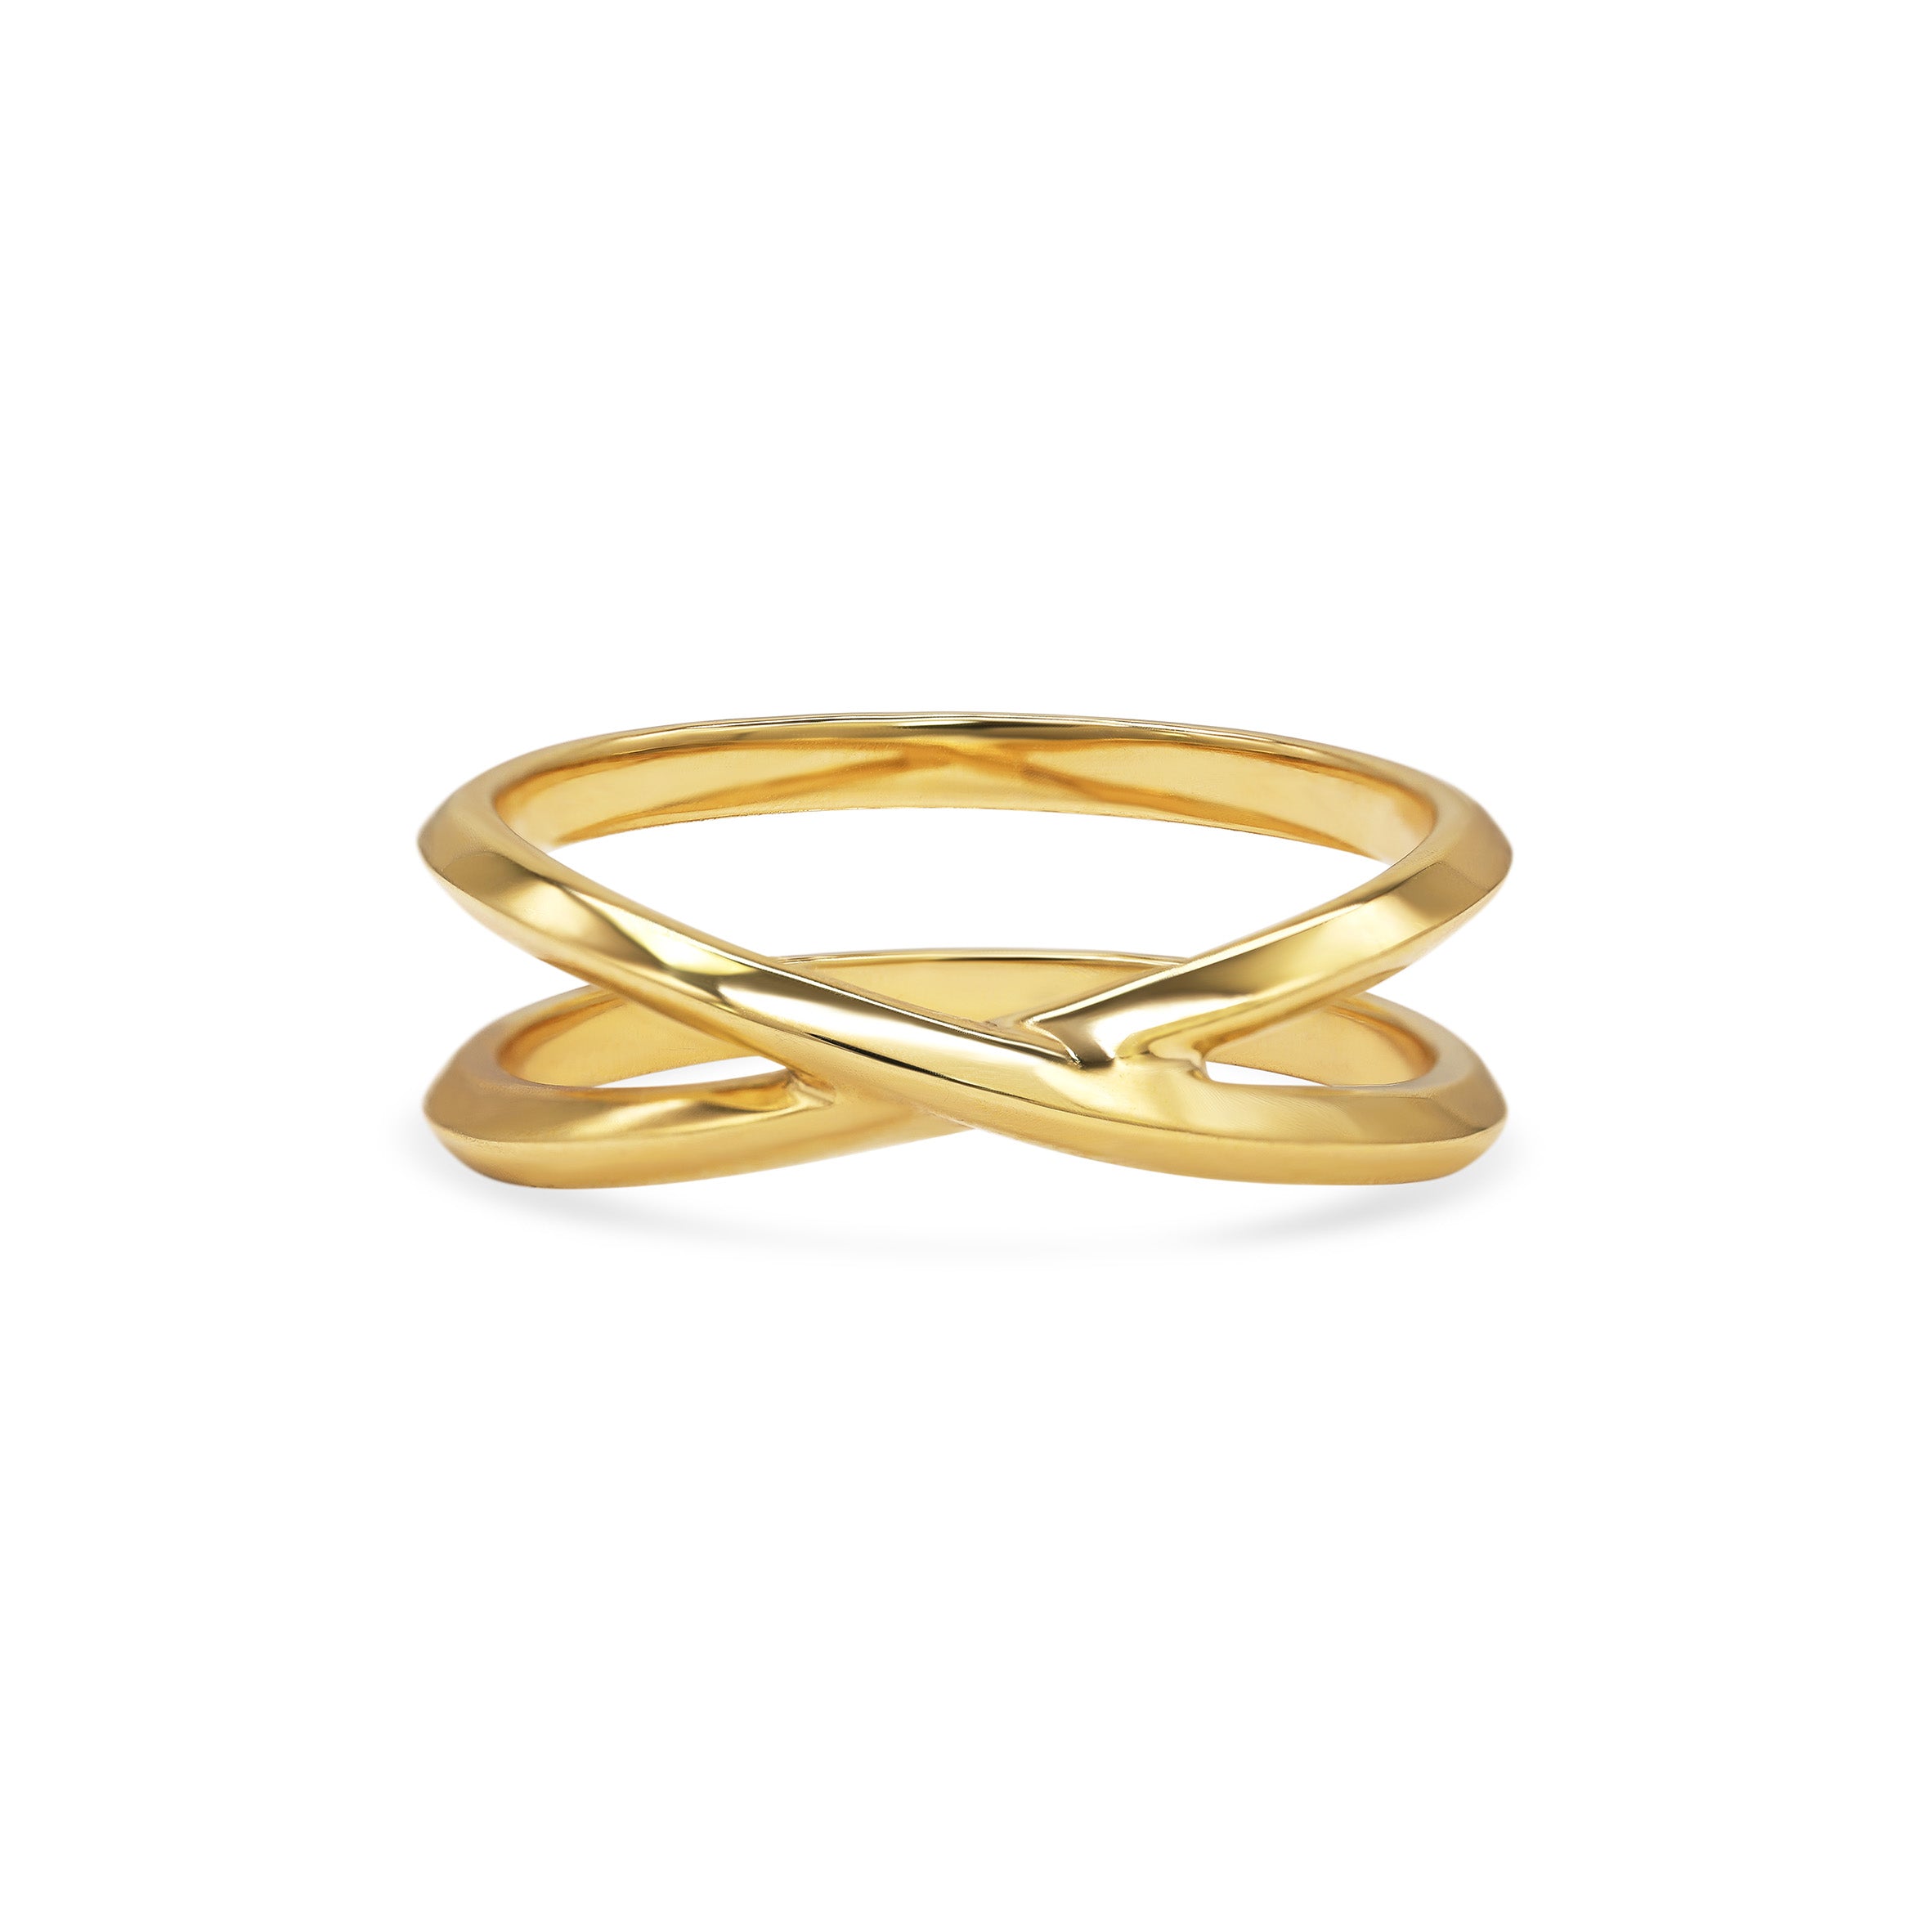 The Cross Ring by East London jeweller Rachel Boston | Discover our collections of unique and timeless engagement rings, wedding rings, and modern fine jewellery.